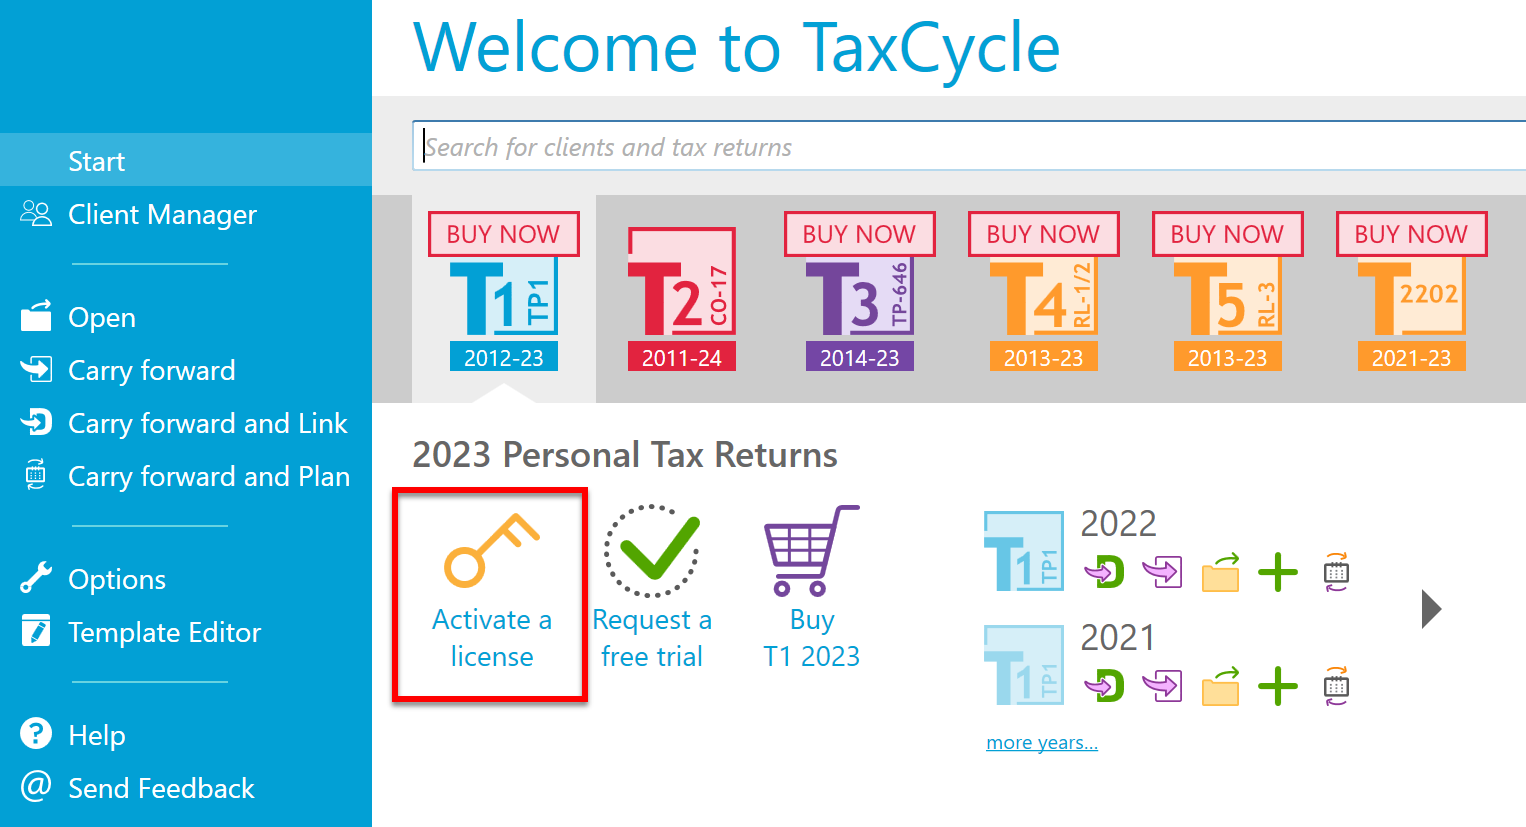 Screen Capture: Activate a 2023 license